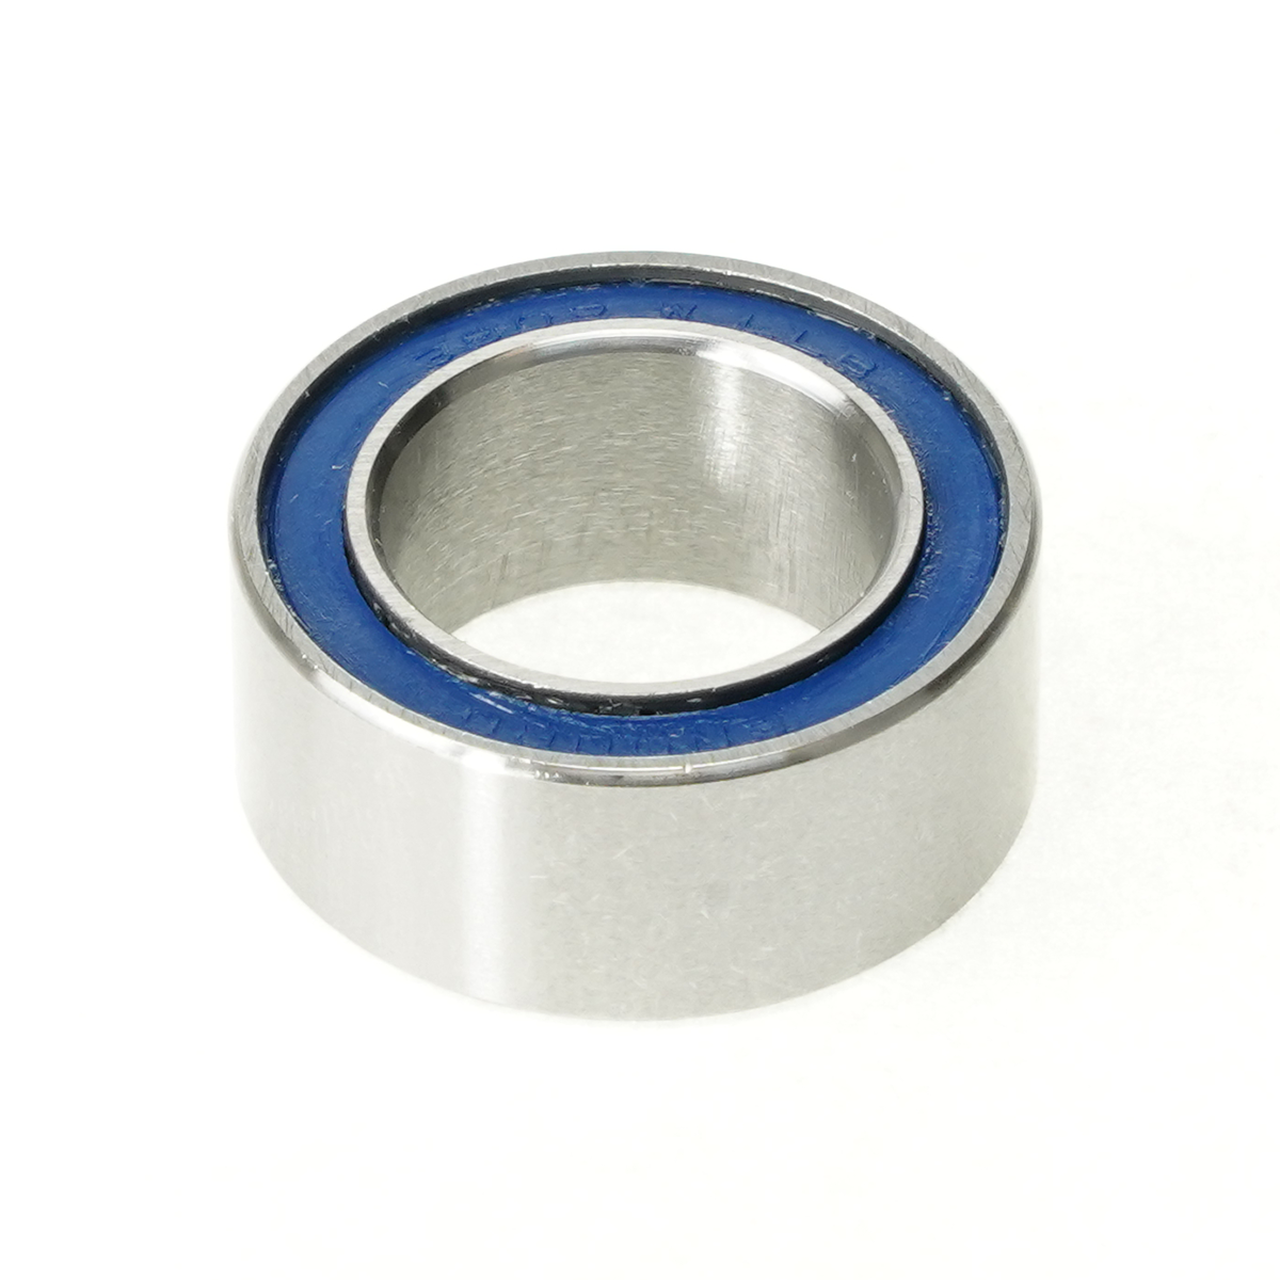 Enduro 3802 W LLB - ABEC-3, Double-Row, Radial Bearing (C3 Clearance) - 15mm x 24mm x 10mm